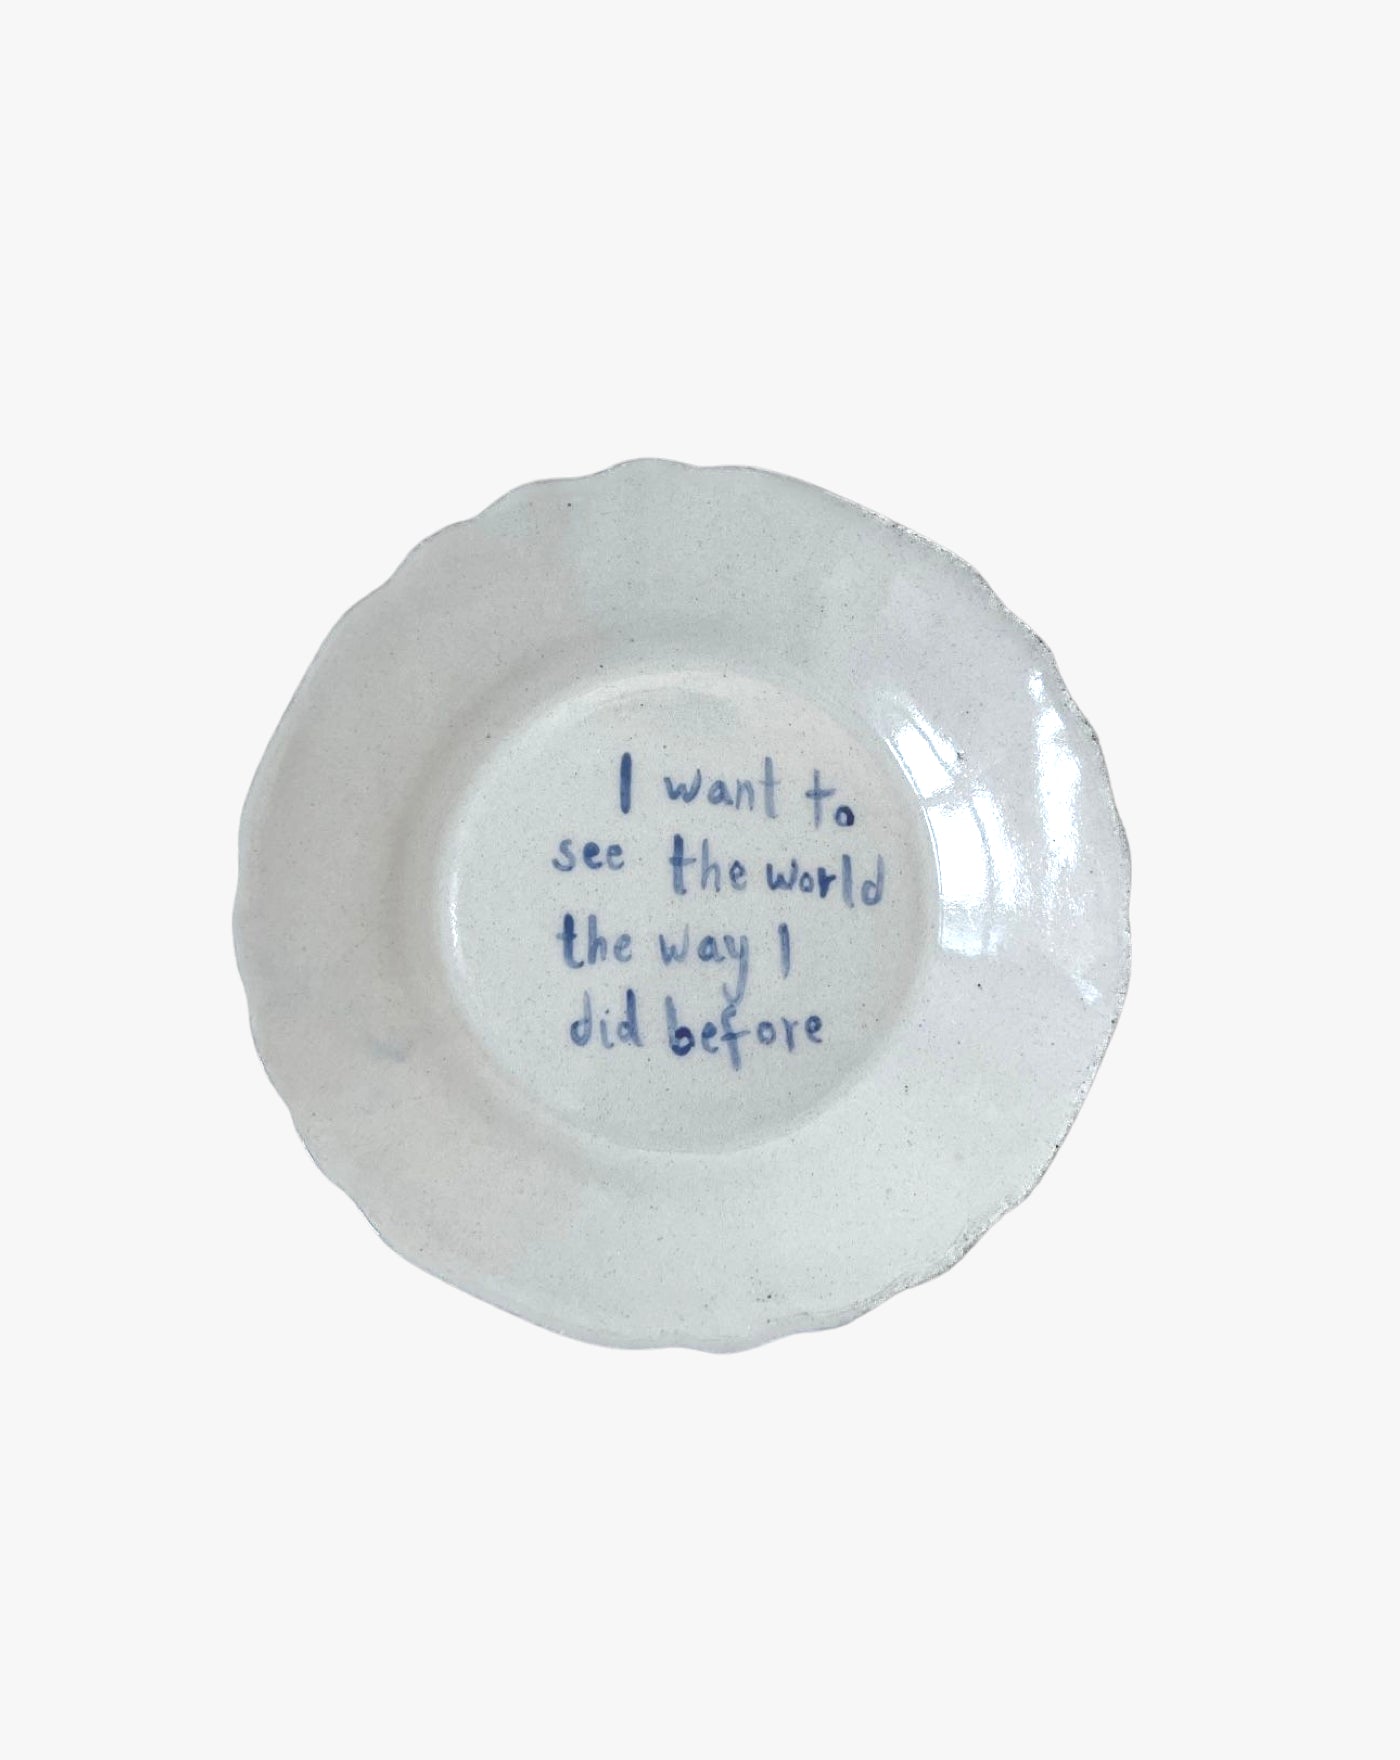 Tea plate "I want to see the world the way I did before"